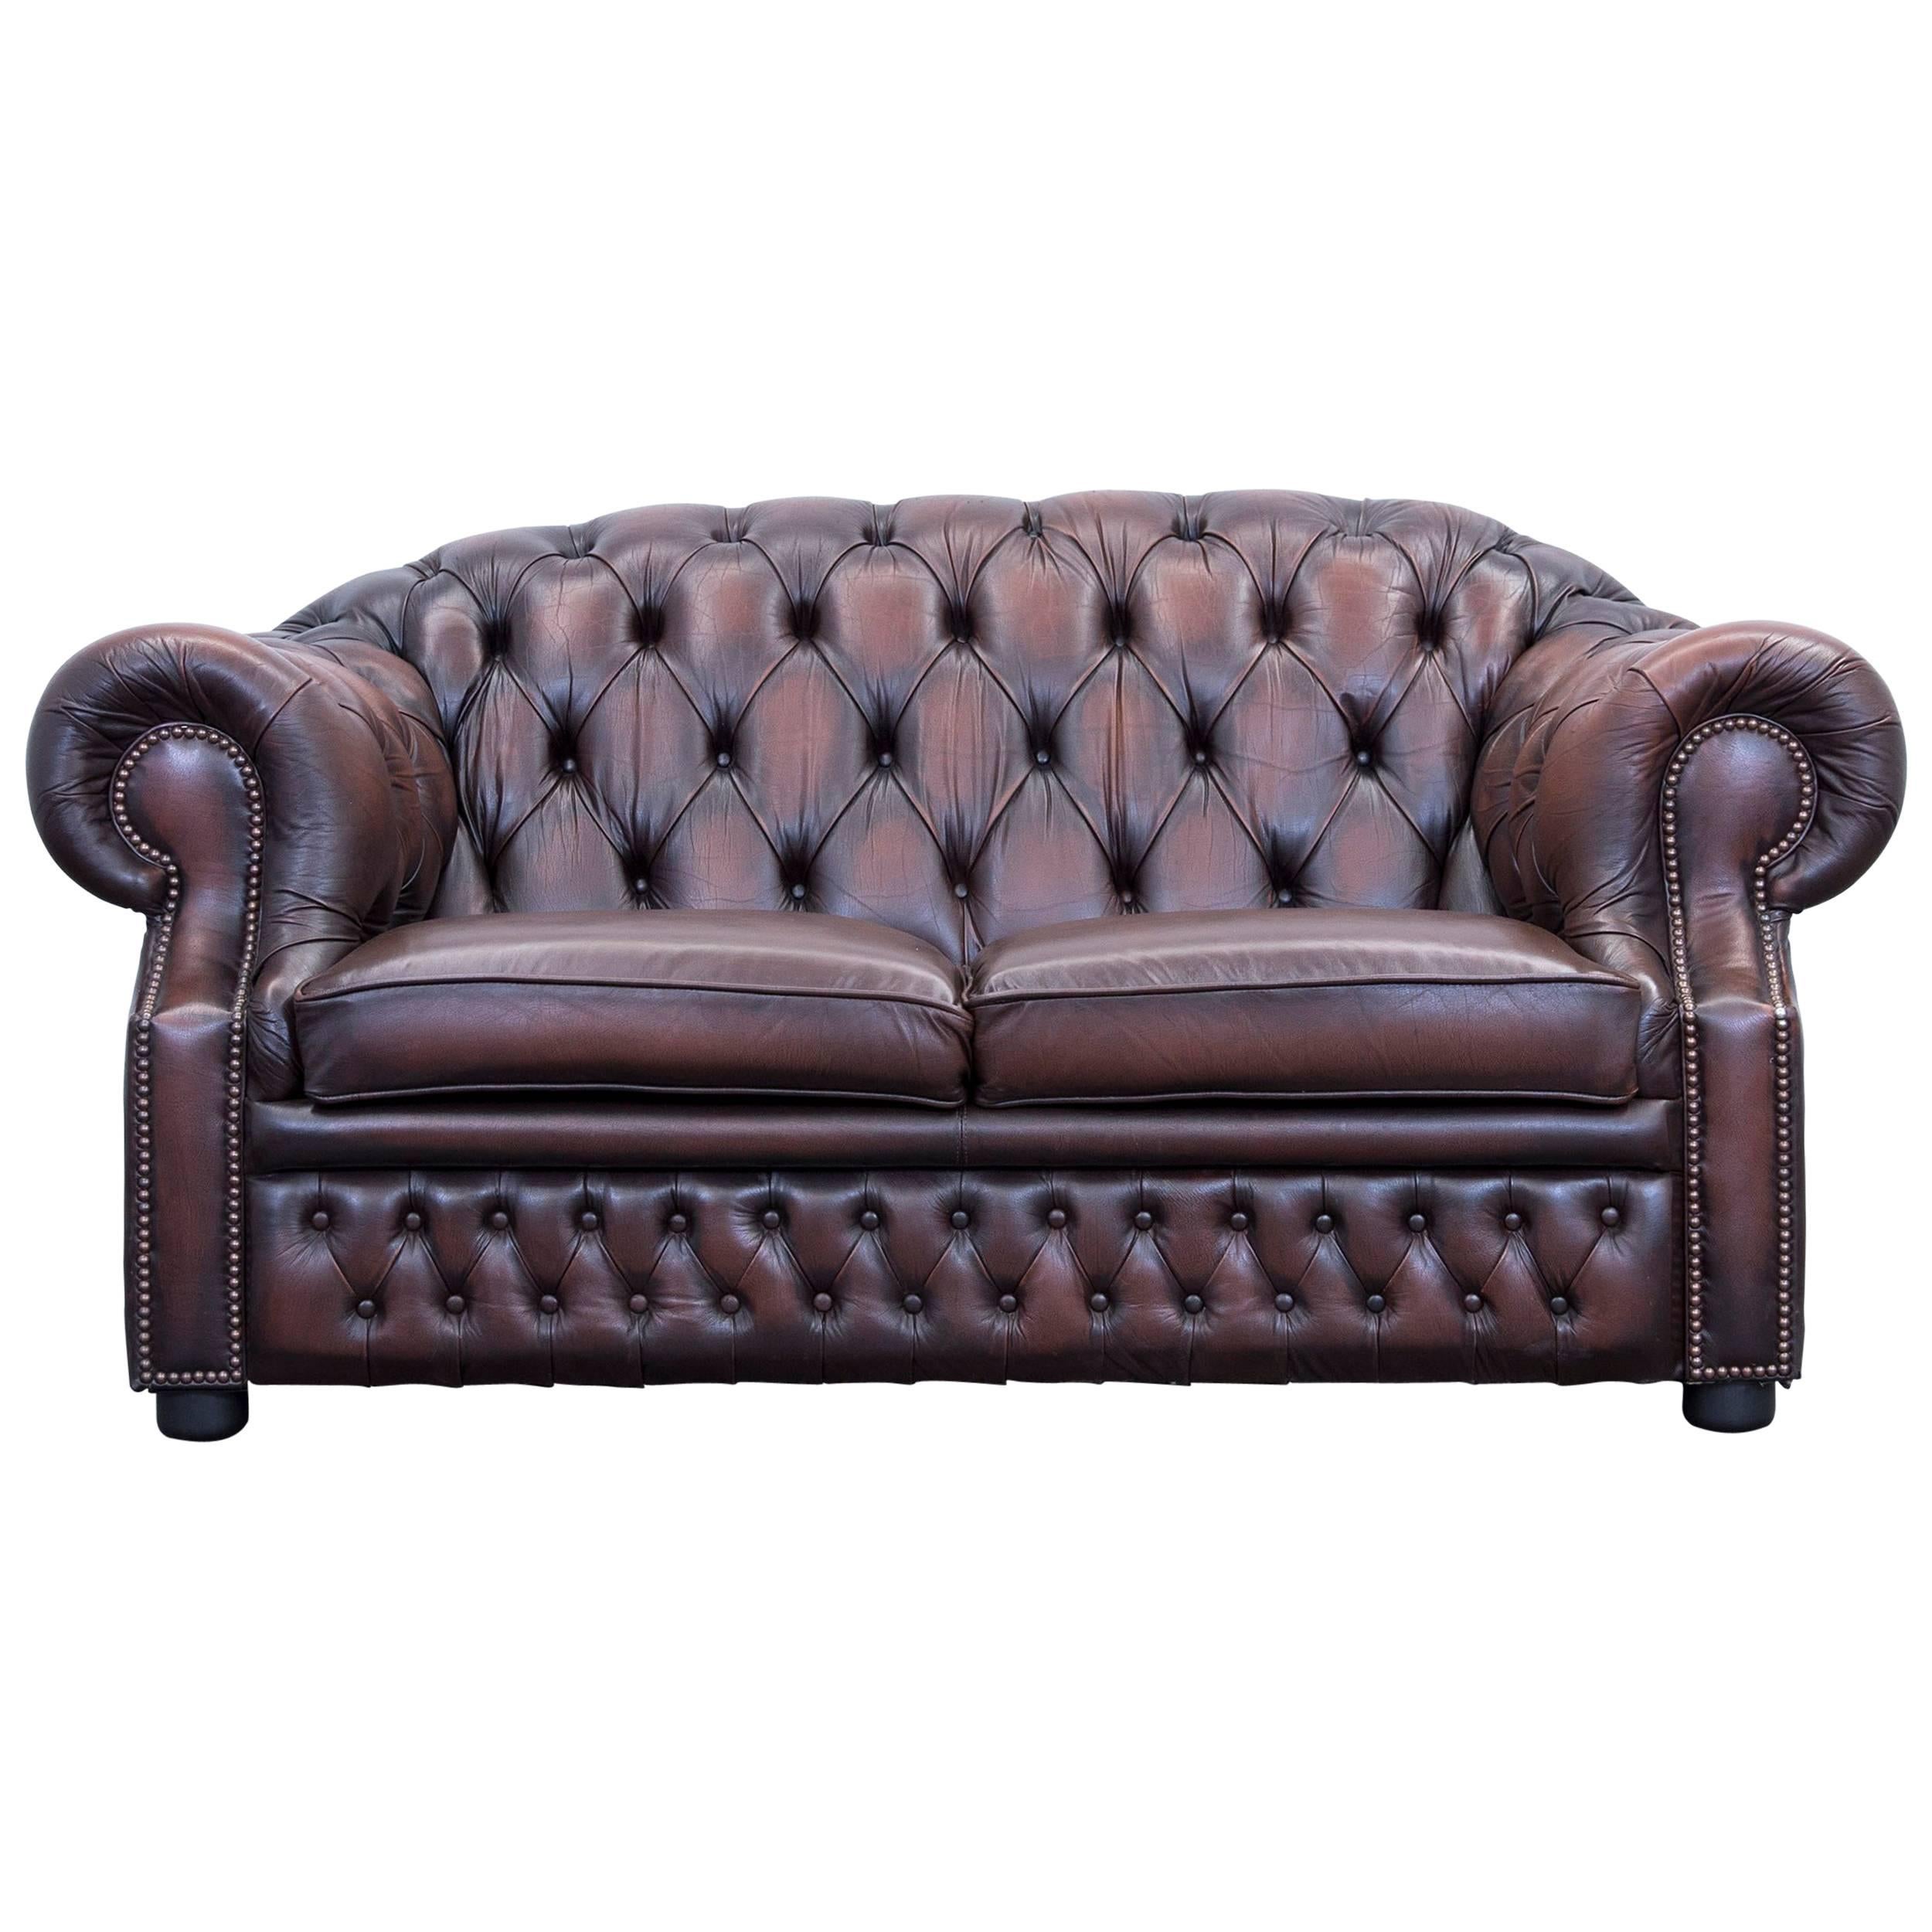 Chesterfield Centurion Leather Sofa Brown Red Two-Seat Vintage Retro